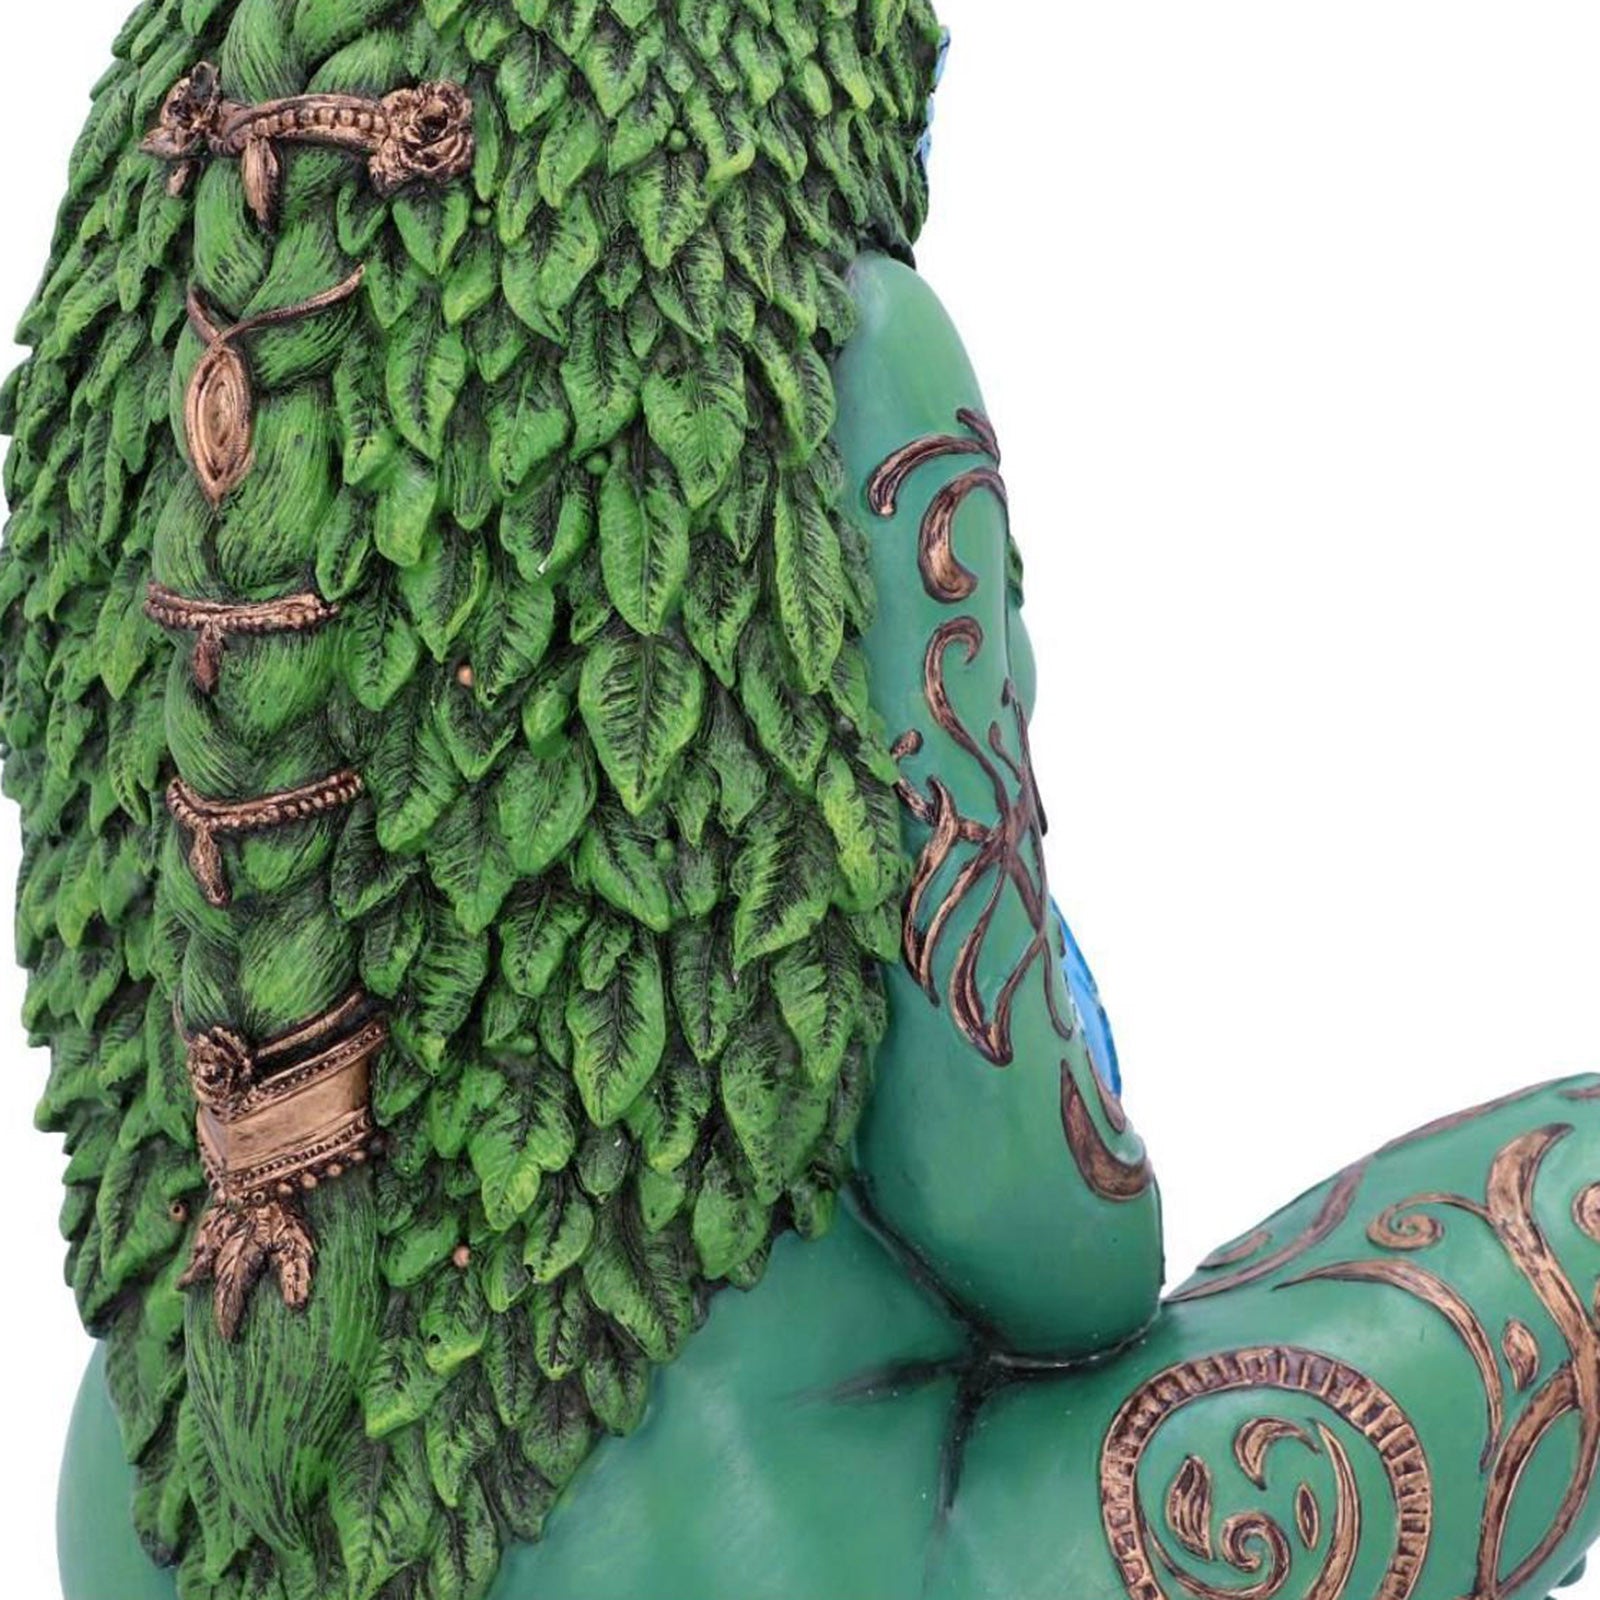 Mother Earth Art Figurine Home and Garden Decoration